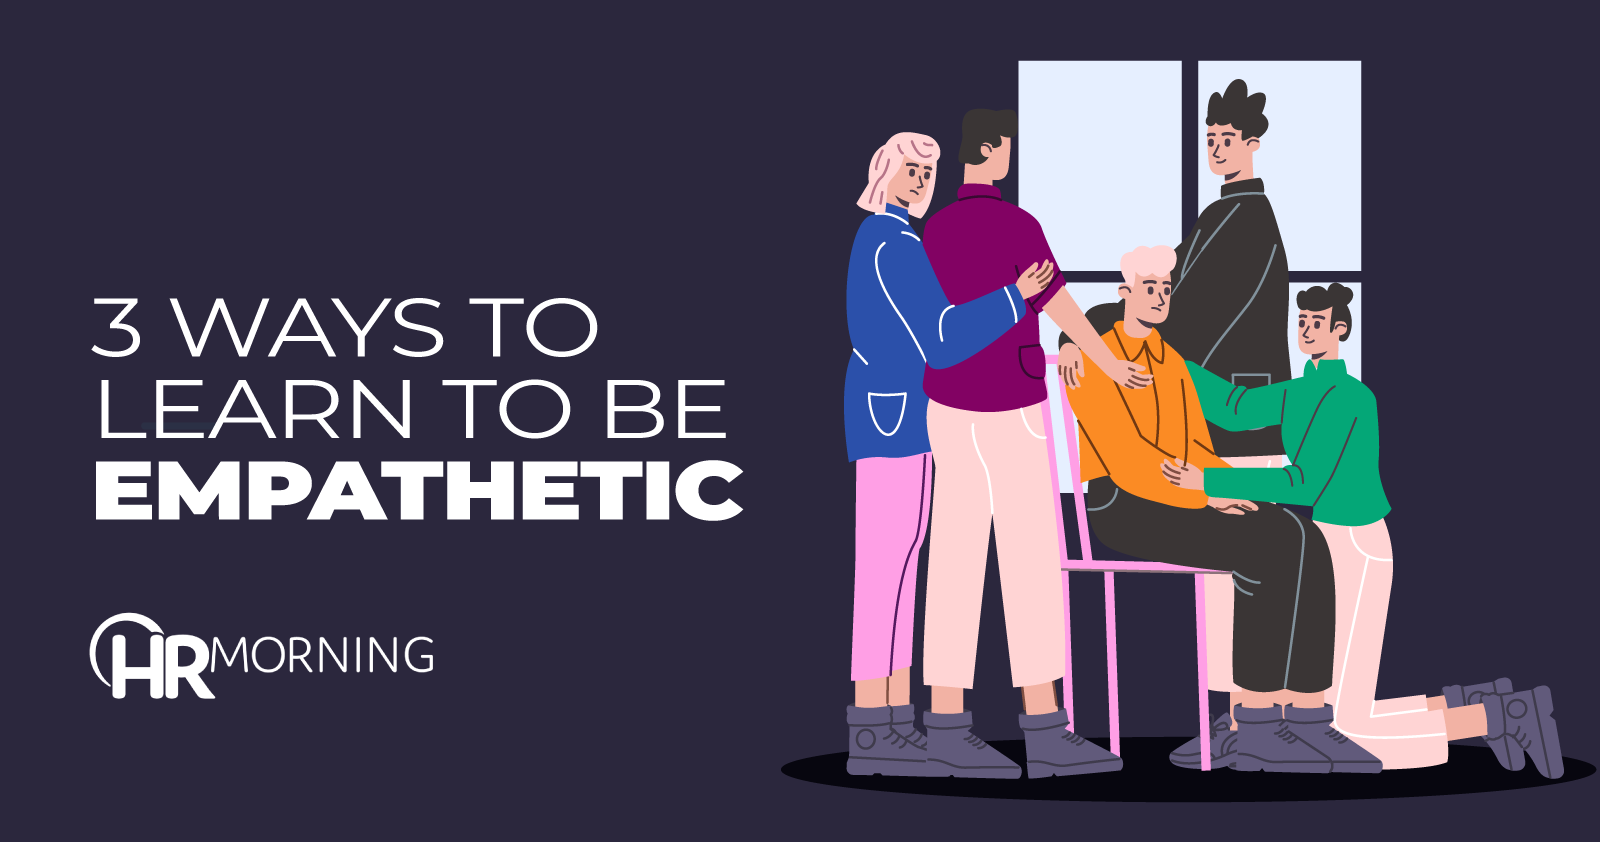 3 ways to learn to be empathetic